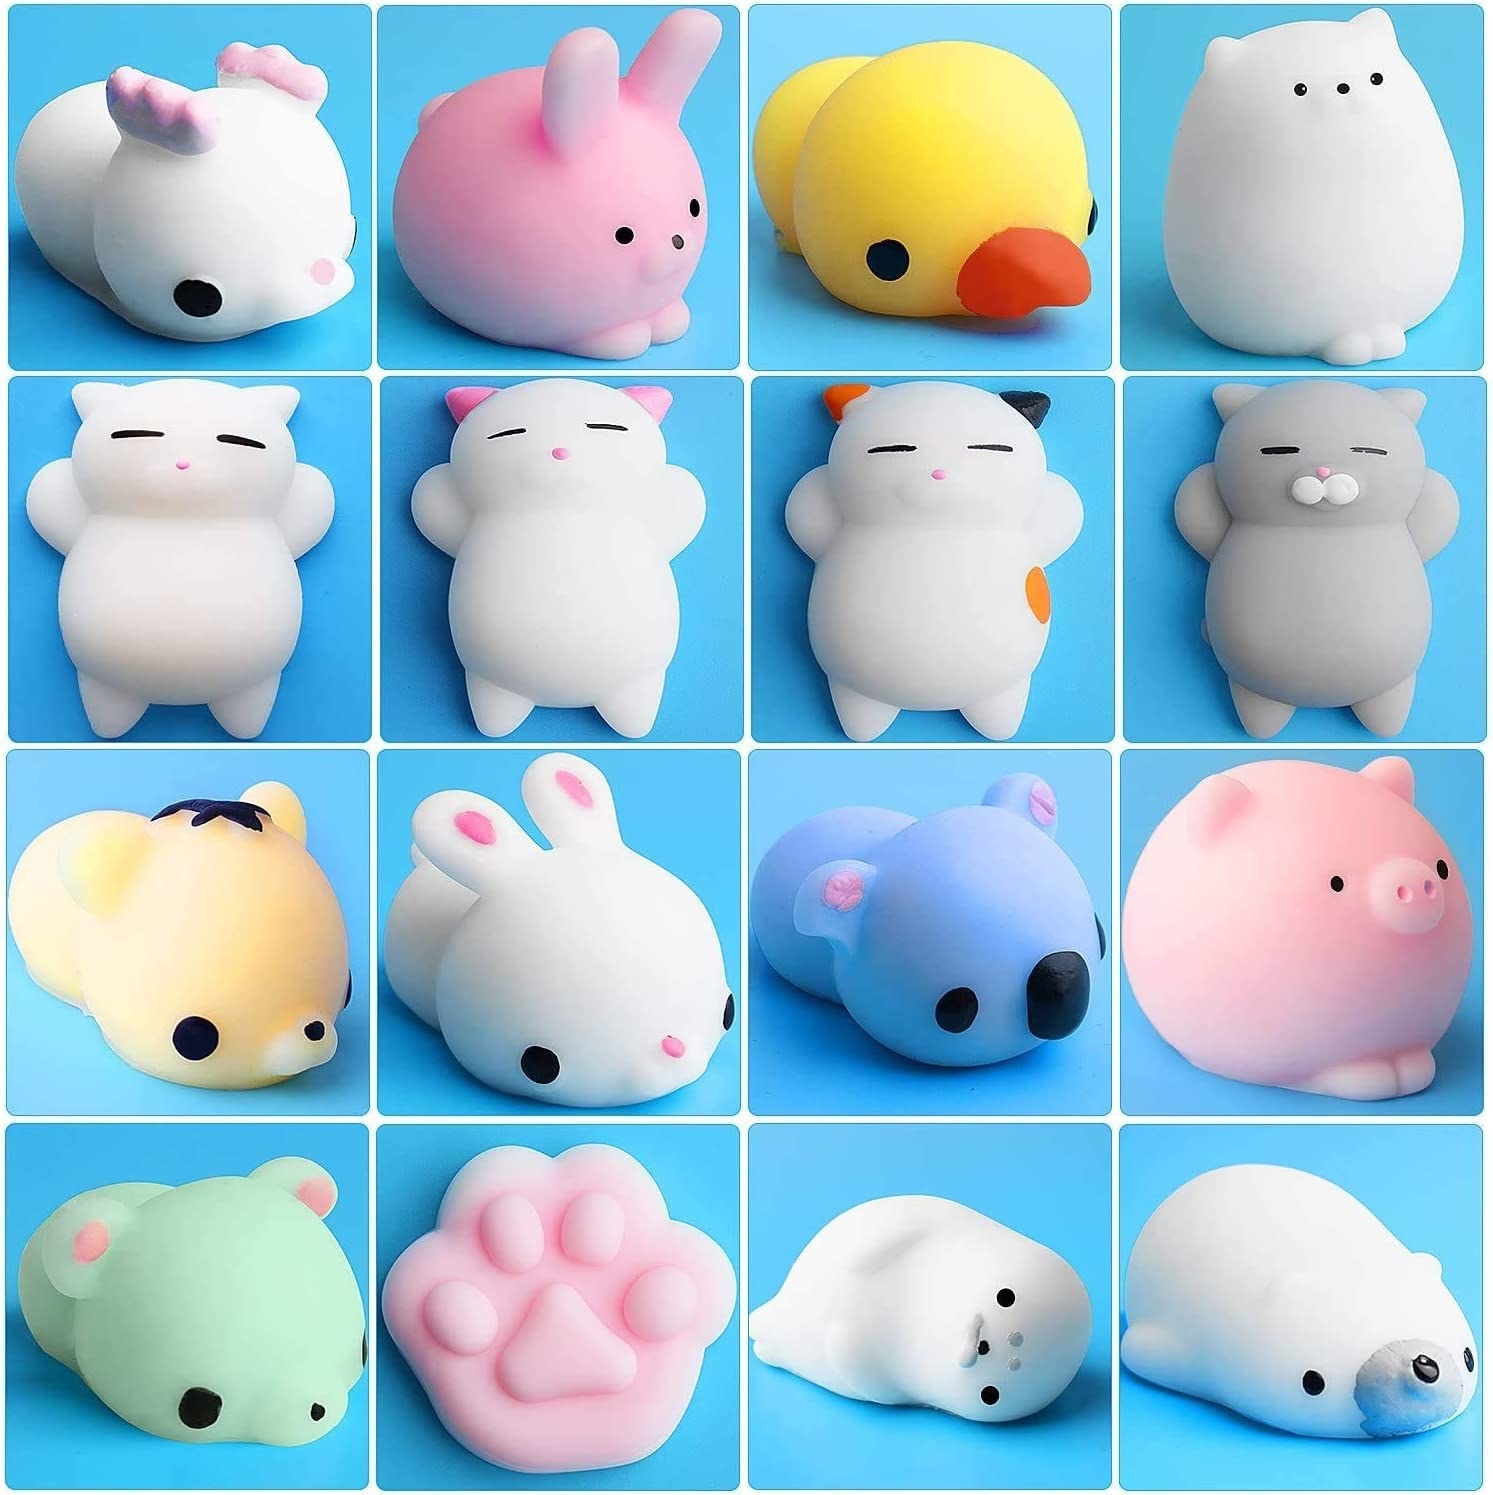 the different shapes of squish, including seals, cats, bunnies, koala, and more